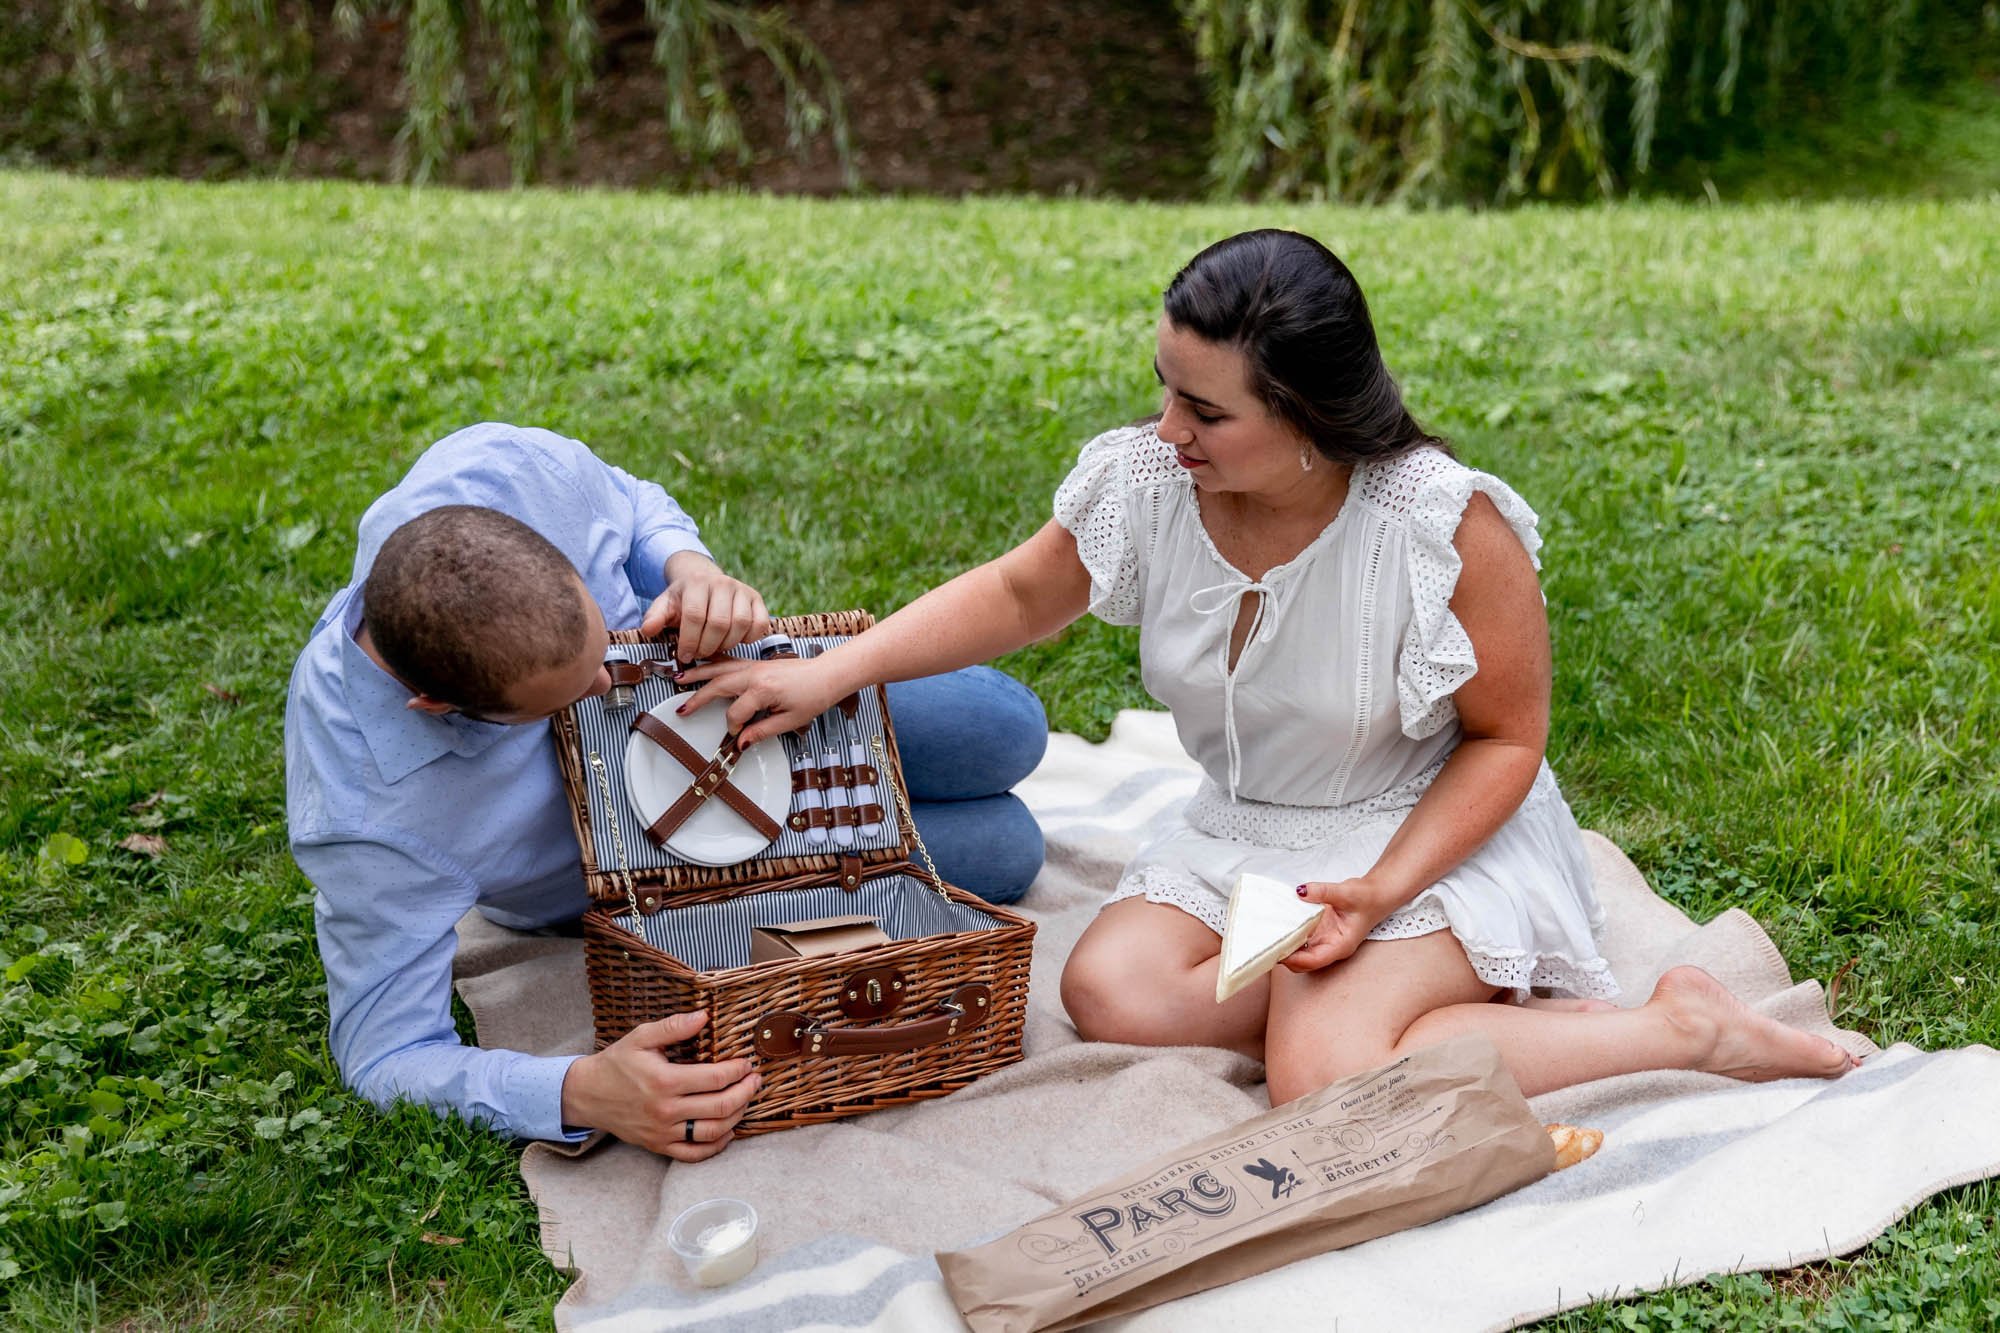 engagement photos with a picnic at carpenter's hall in old city, philadelphia